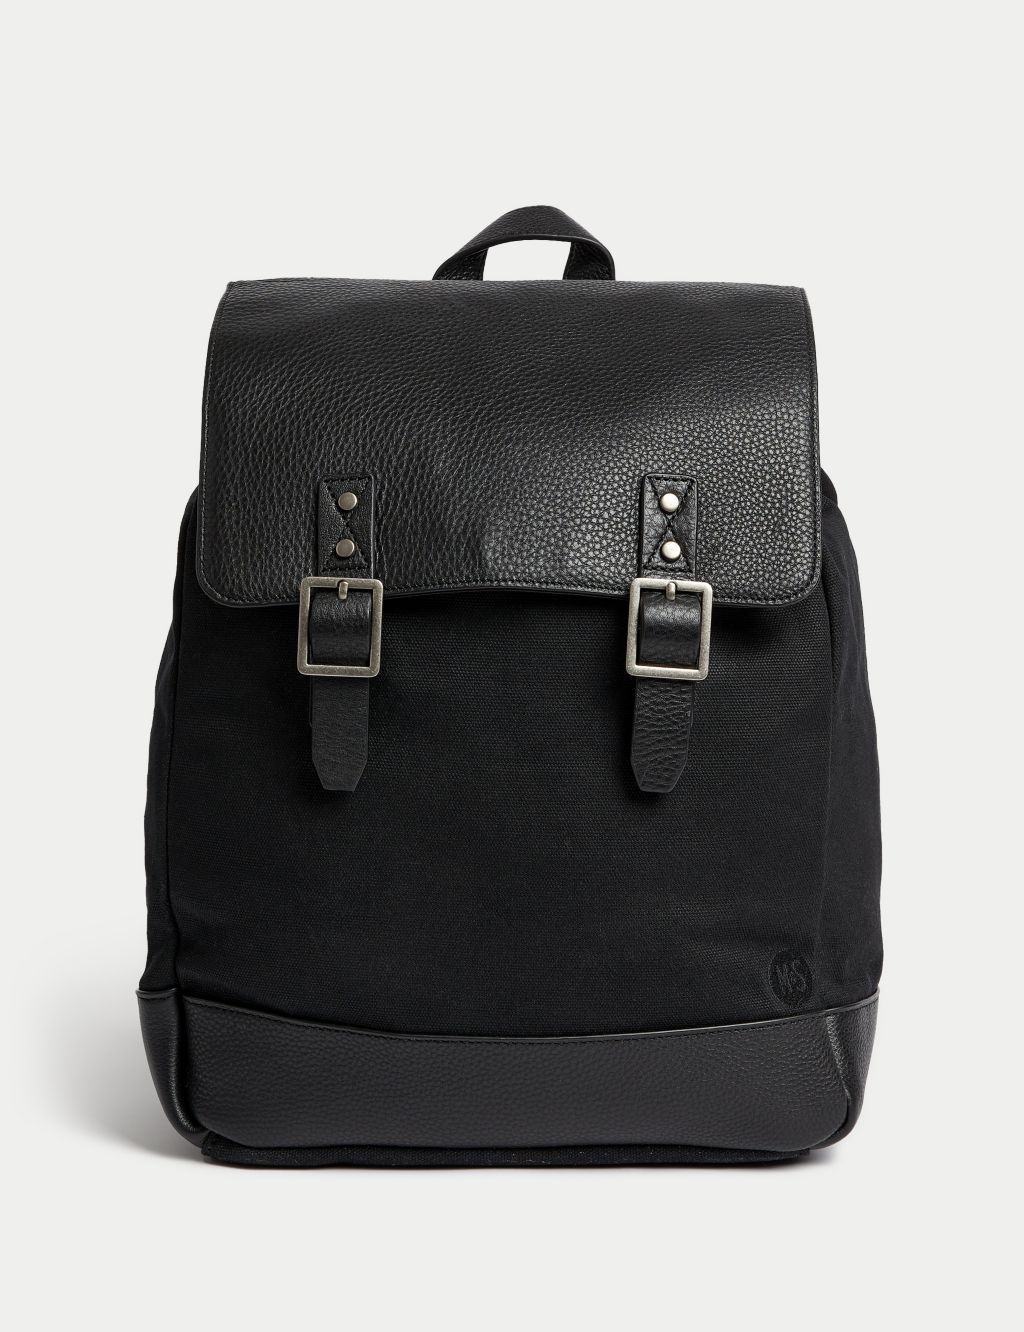 Leather & Cotton Backpack image 1